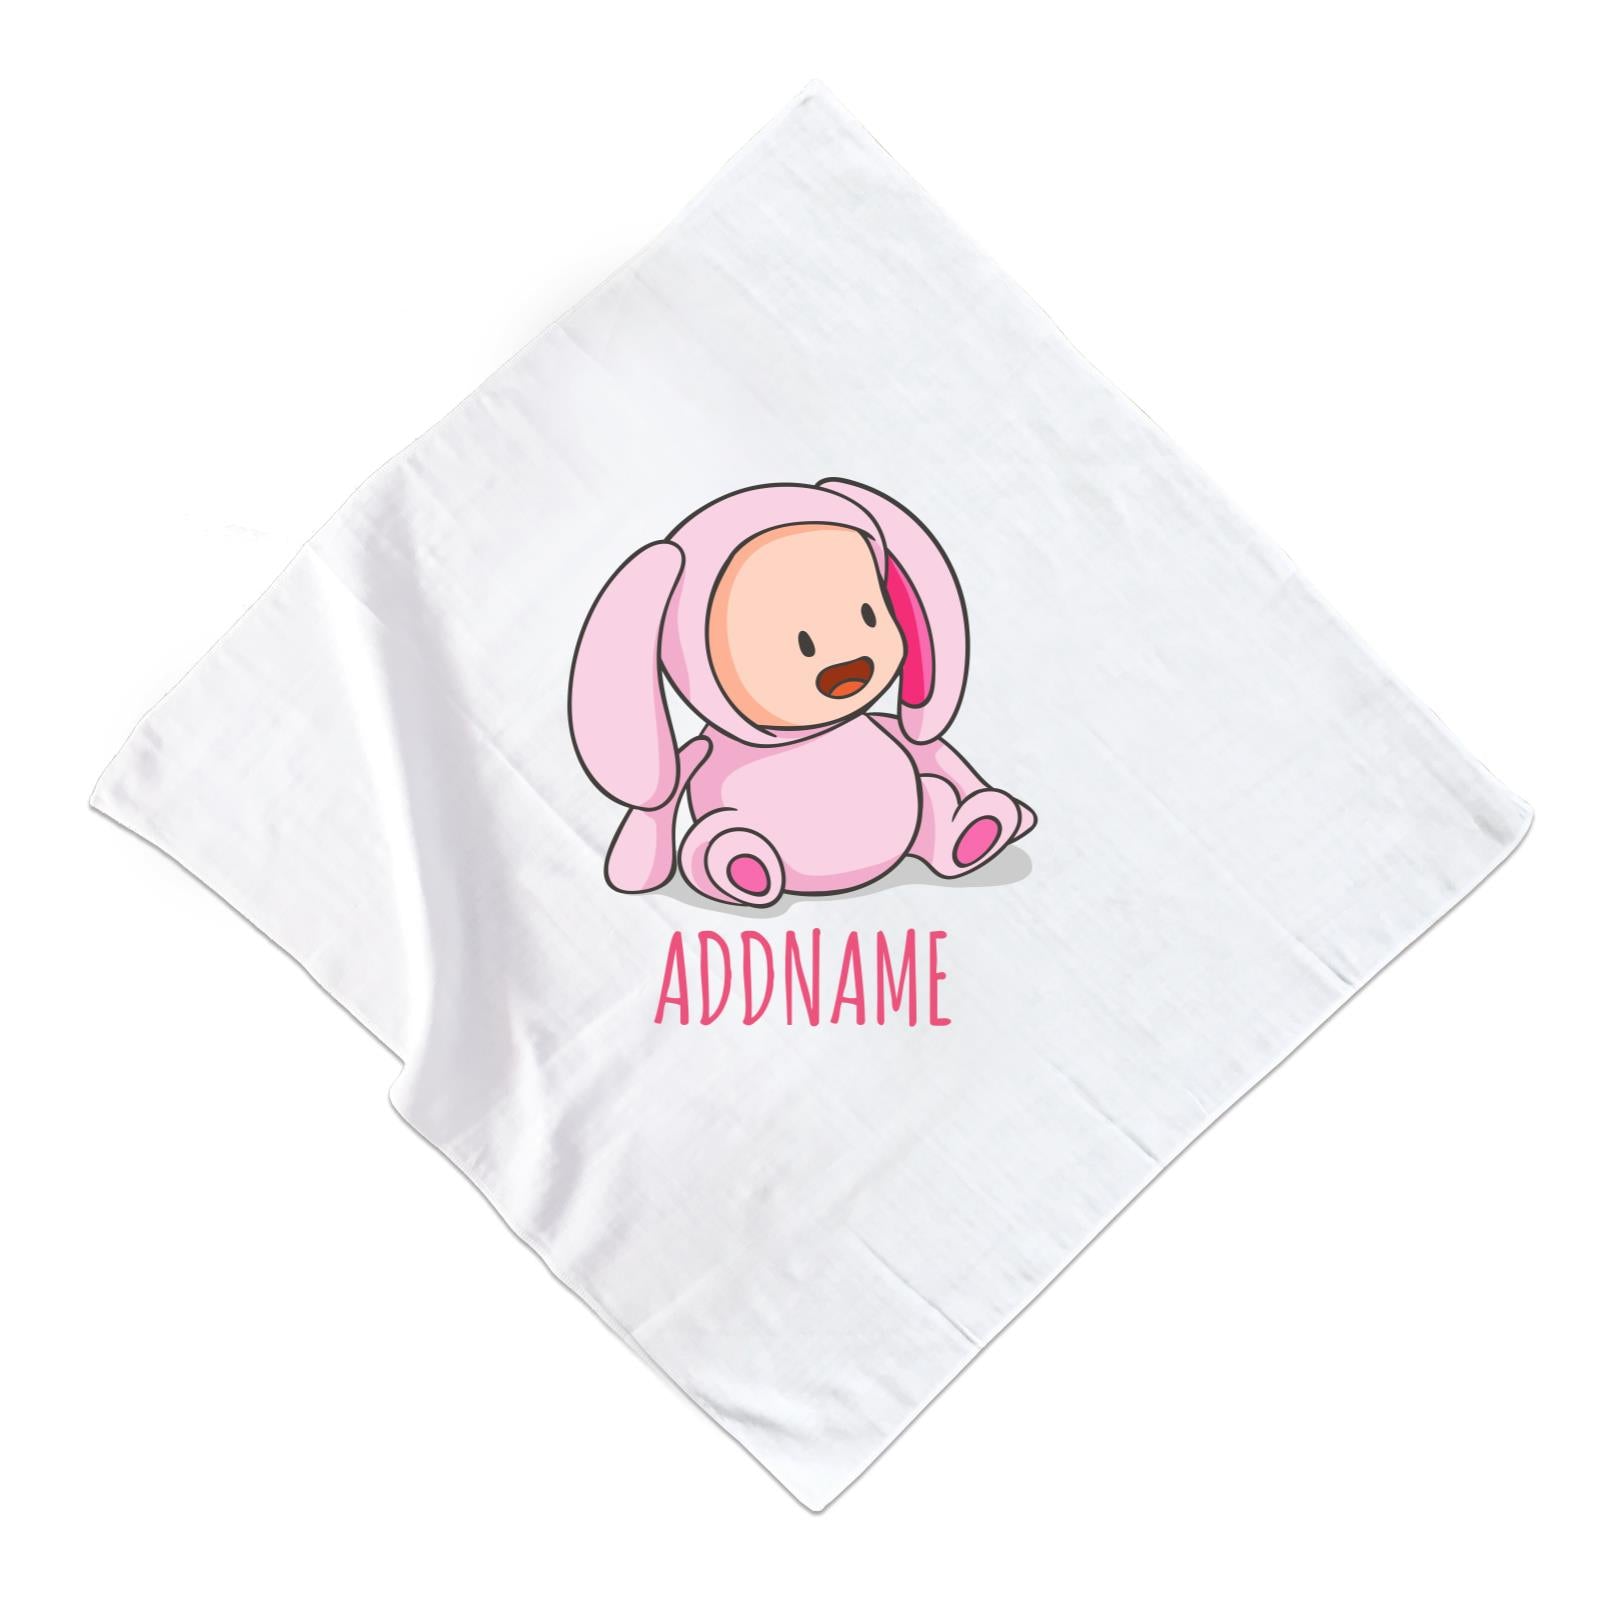 Cute Baby in Pink Rabbit Suit Addname Muslin Square